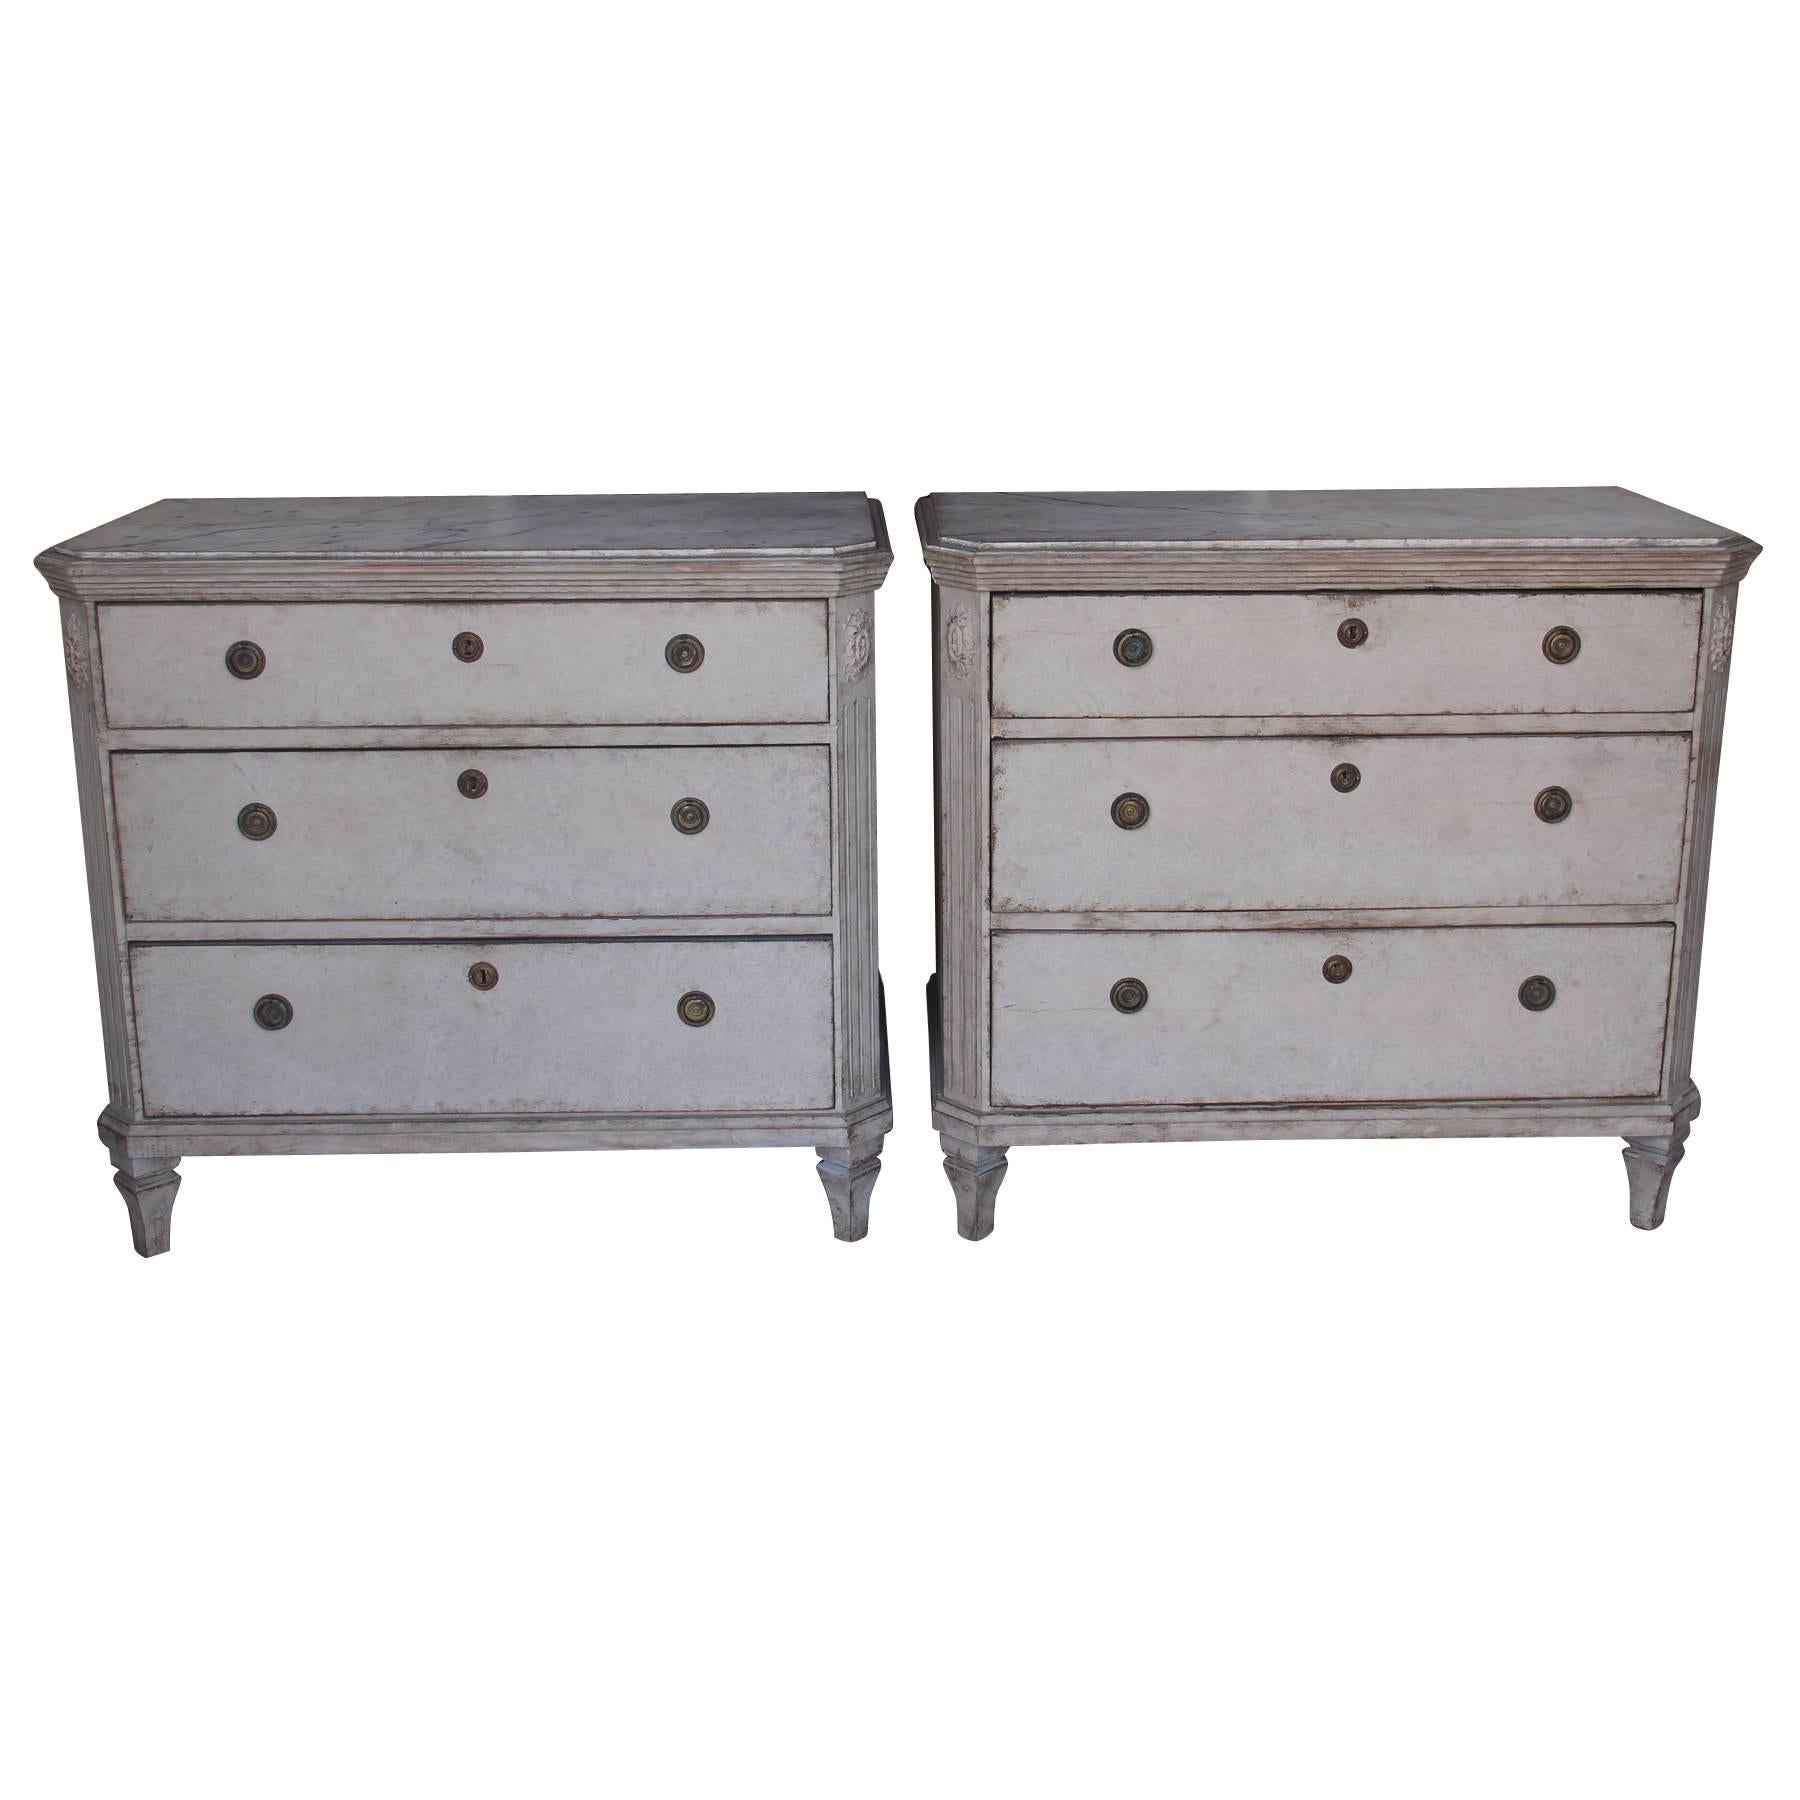 19th Century Swedish Gustavian Style Pair of Painted Bedside Chests